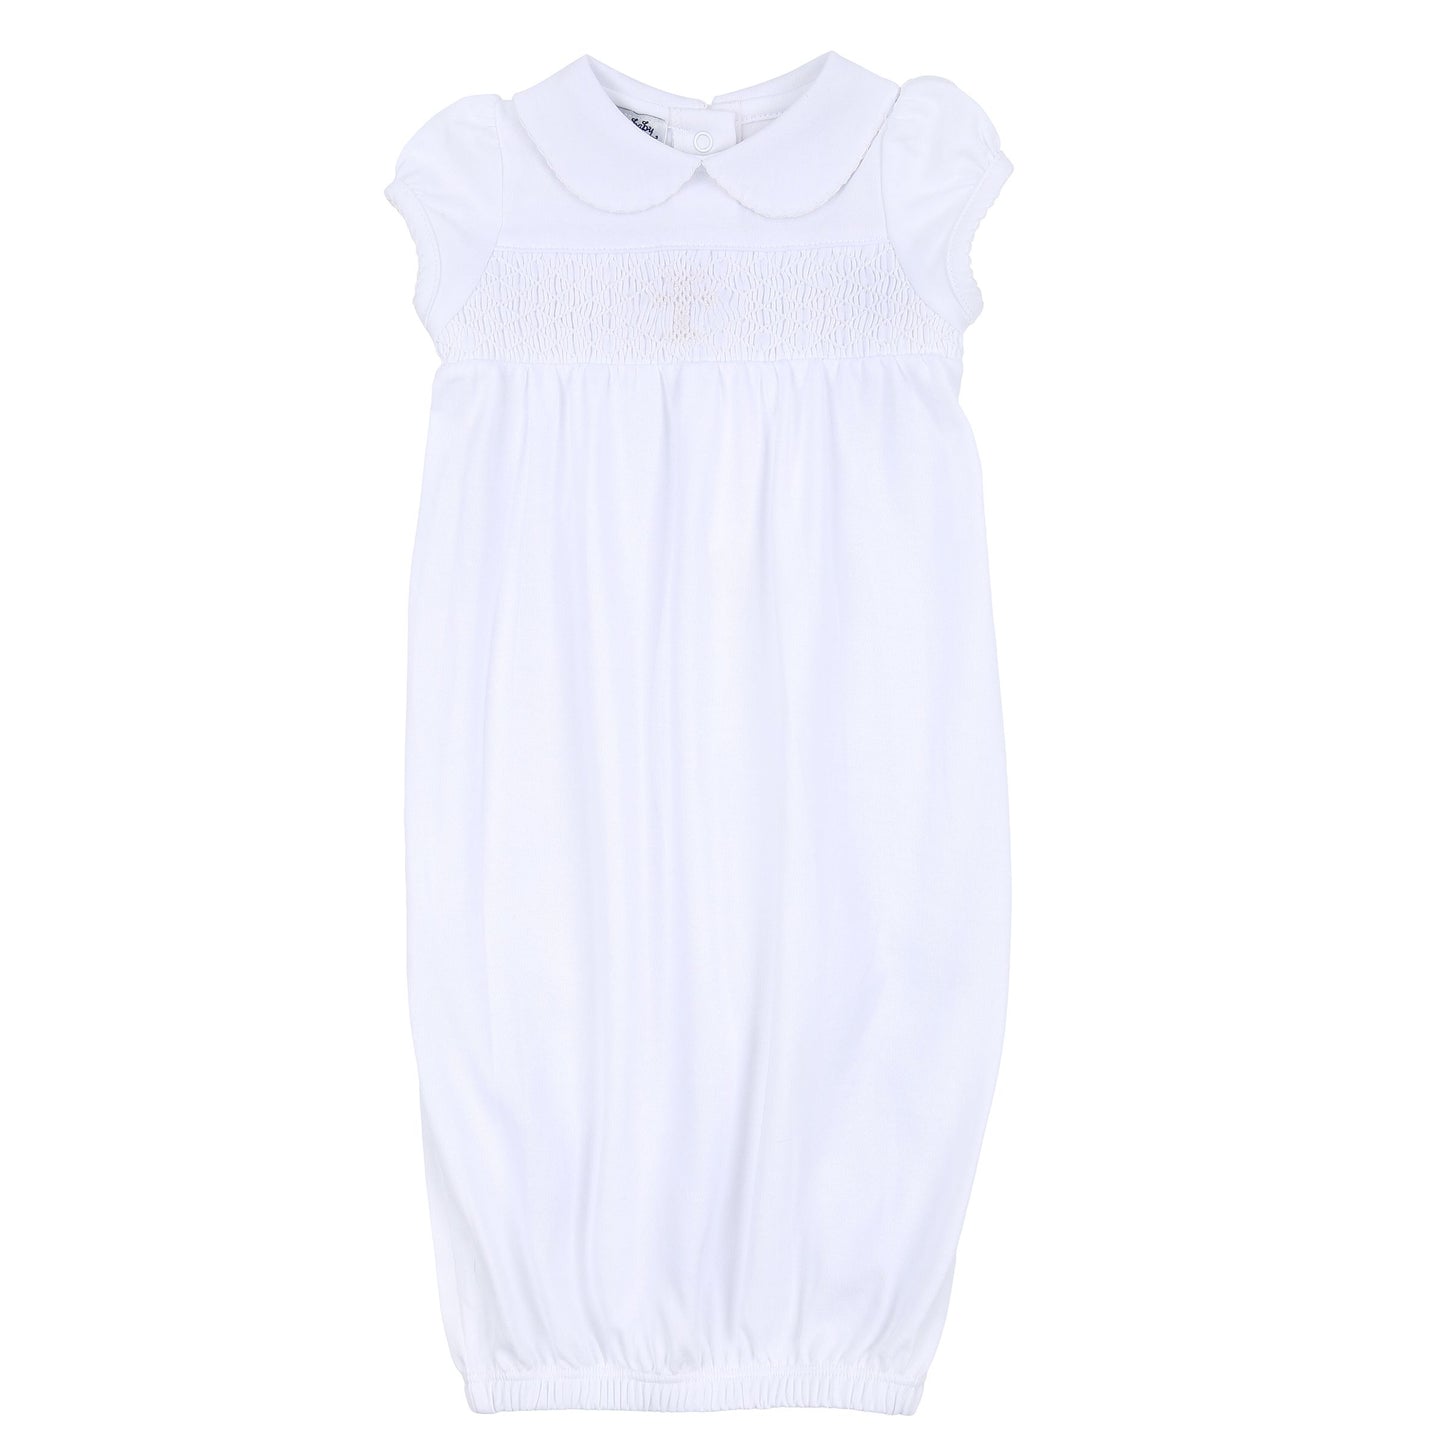 BLESSED SMOCKED COLLARED S/S GATHER GOWN - WHITE